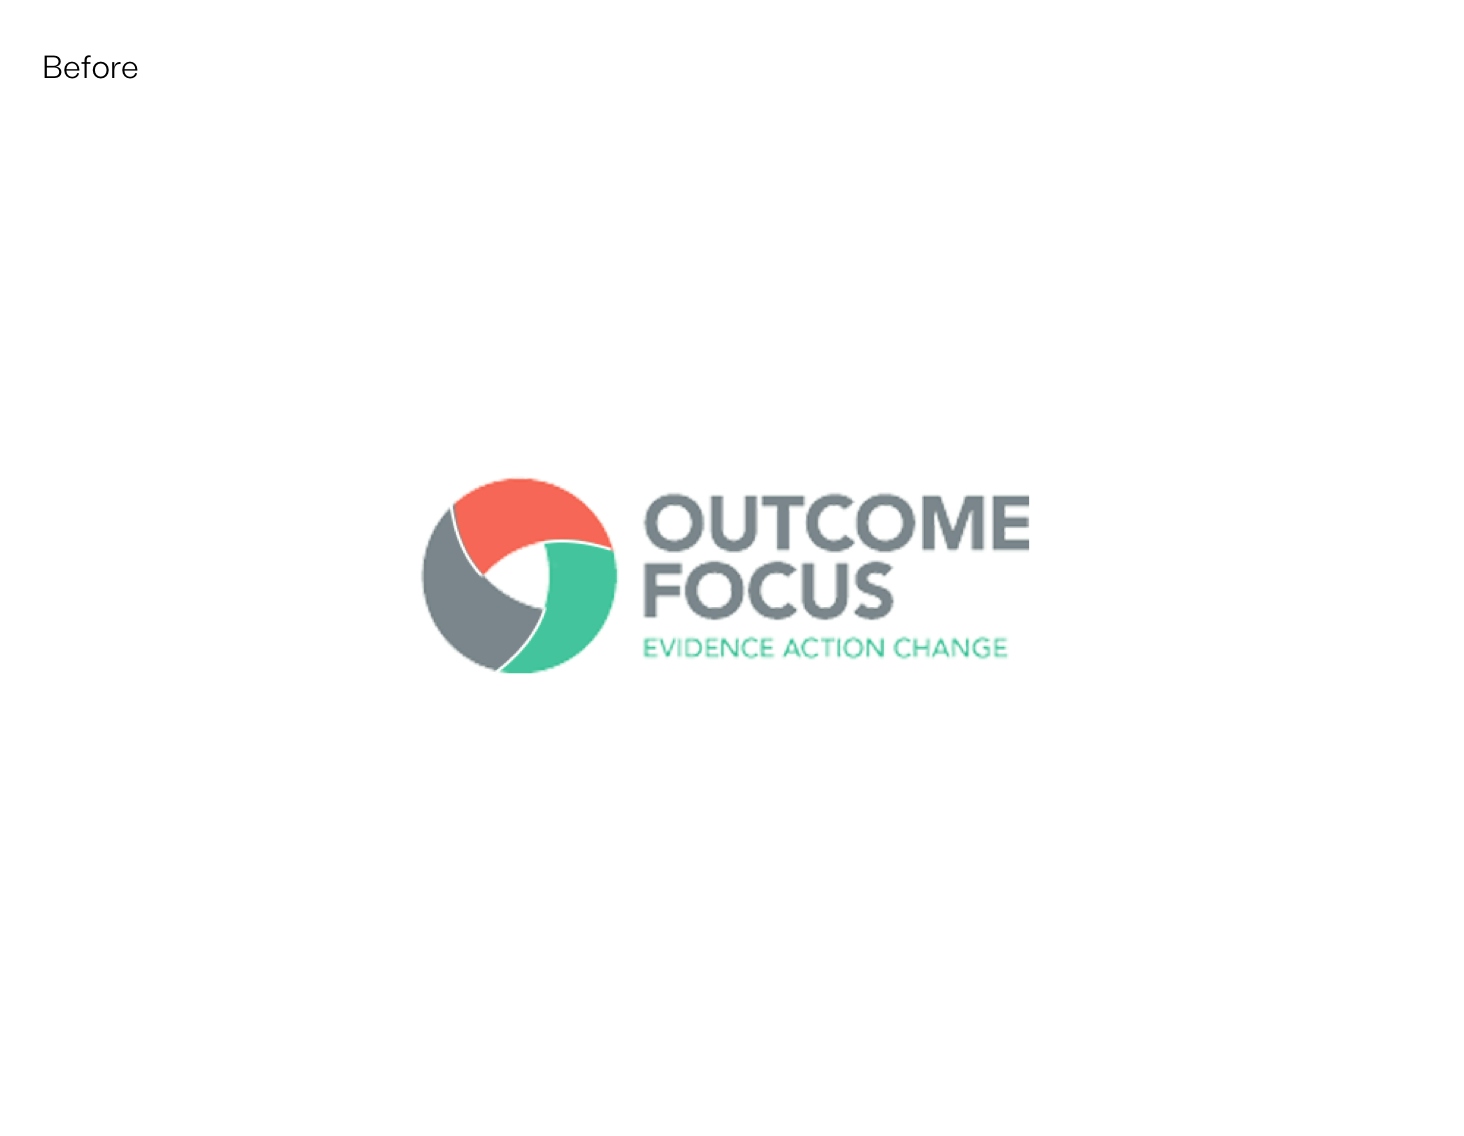 “Outcome Focus” typography and logo